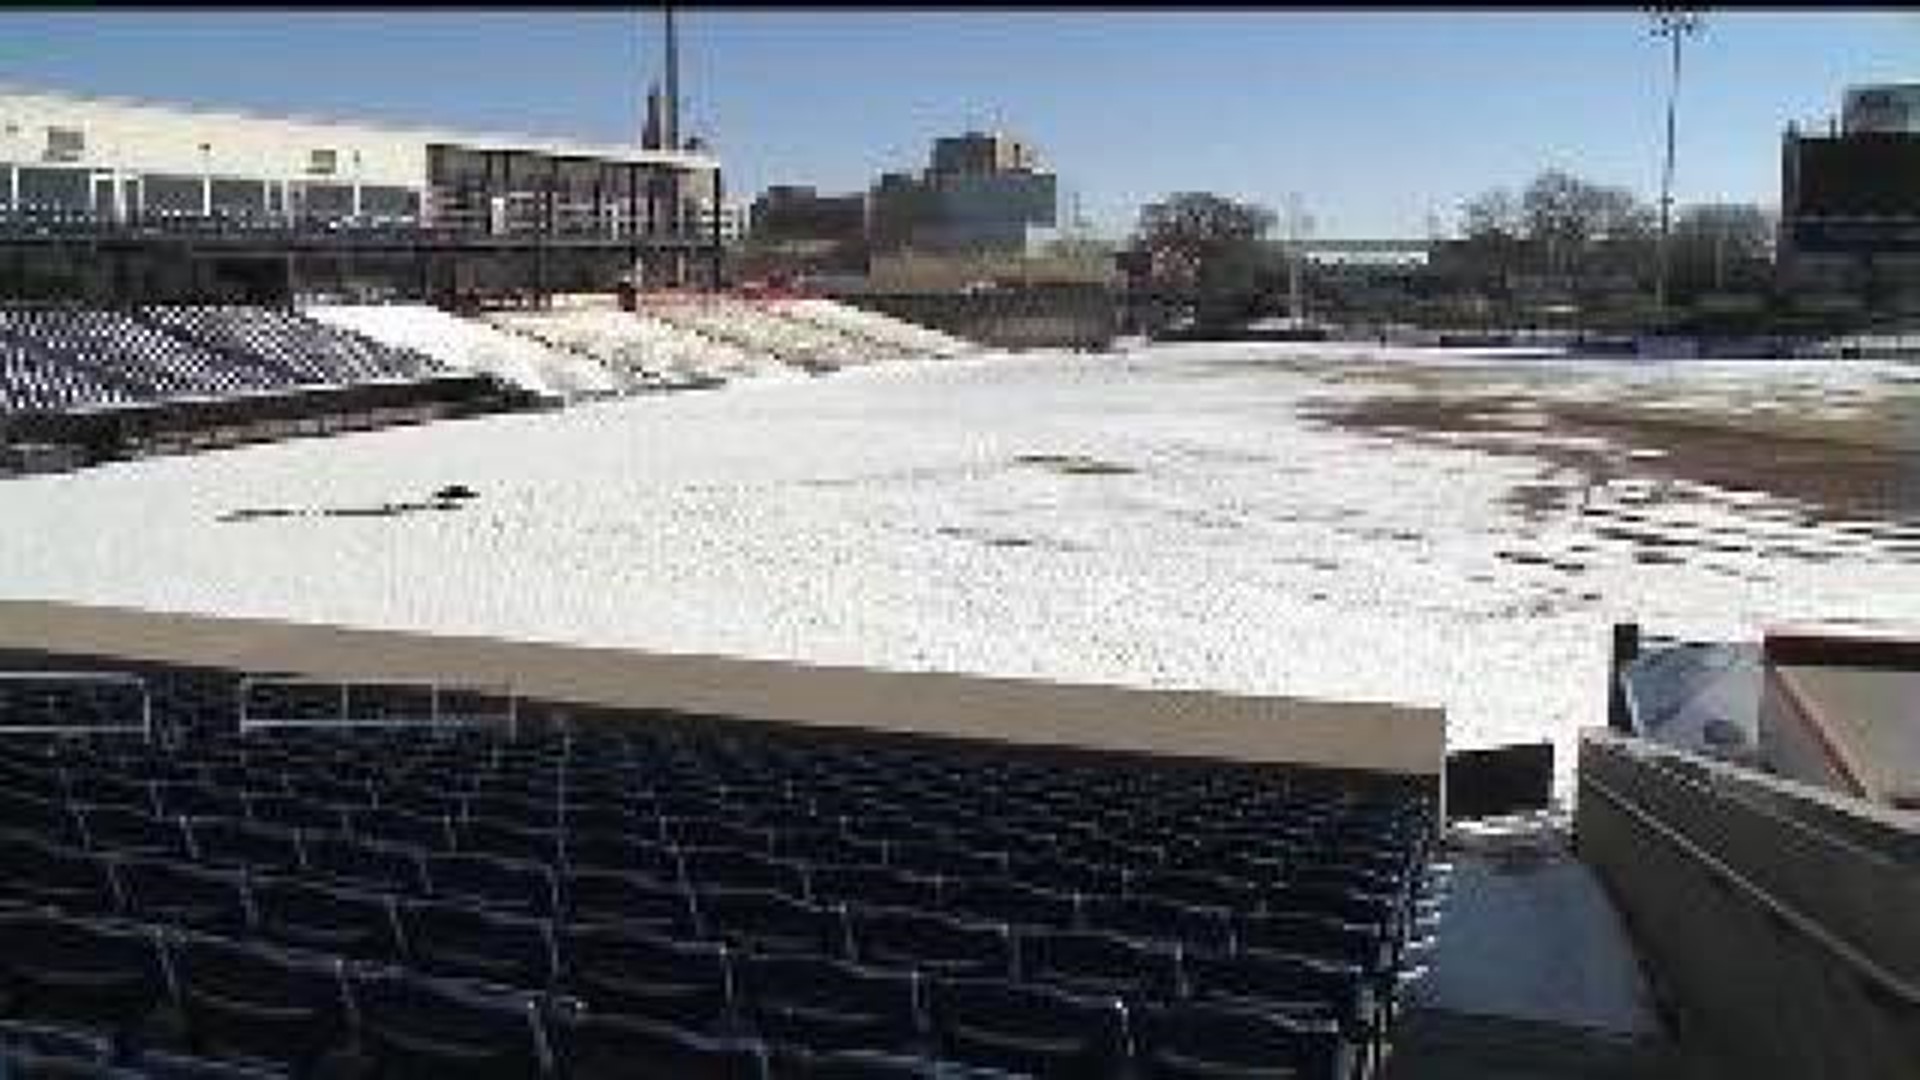 Modern Woodmen Park Covered in Snow